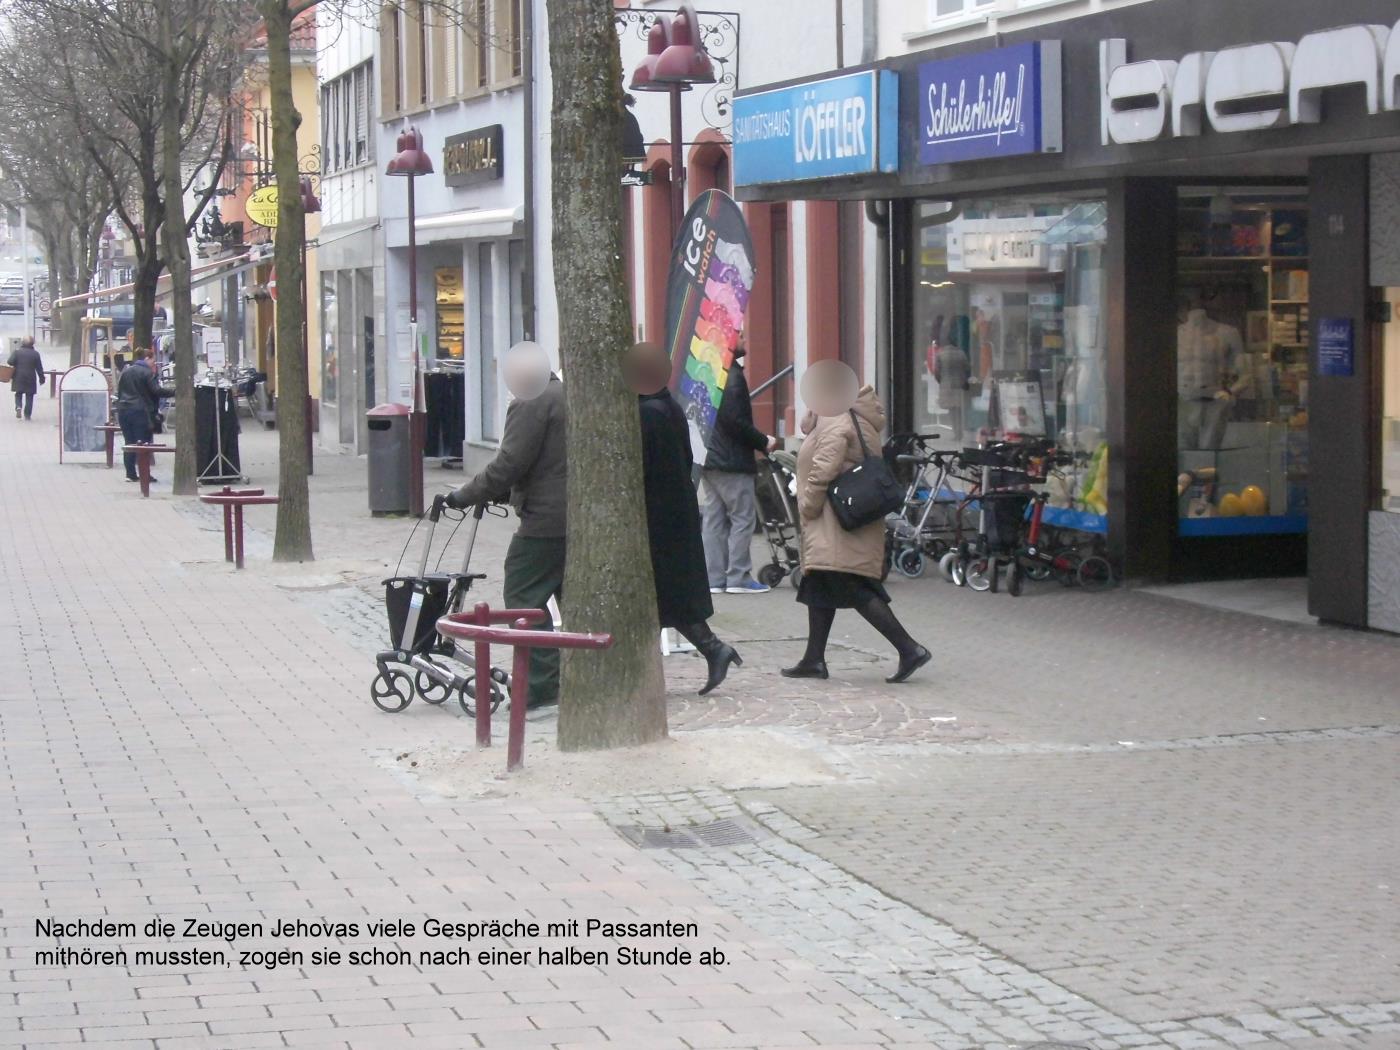 Jehovah's Witnesses in Wiesloch recognize their embarrassment